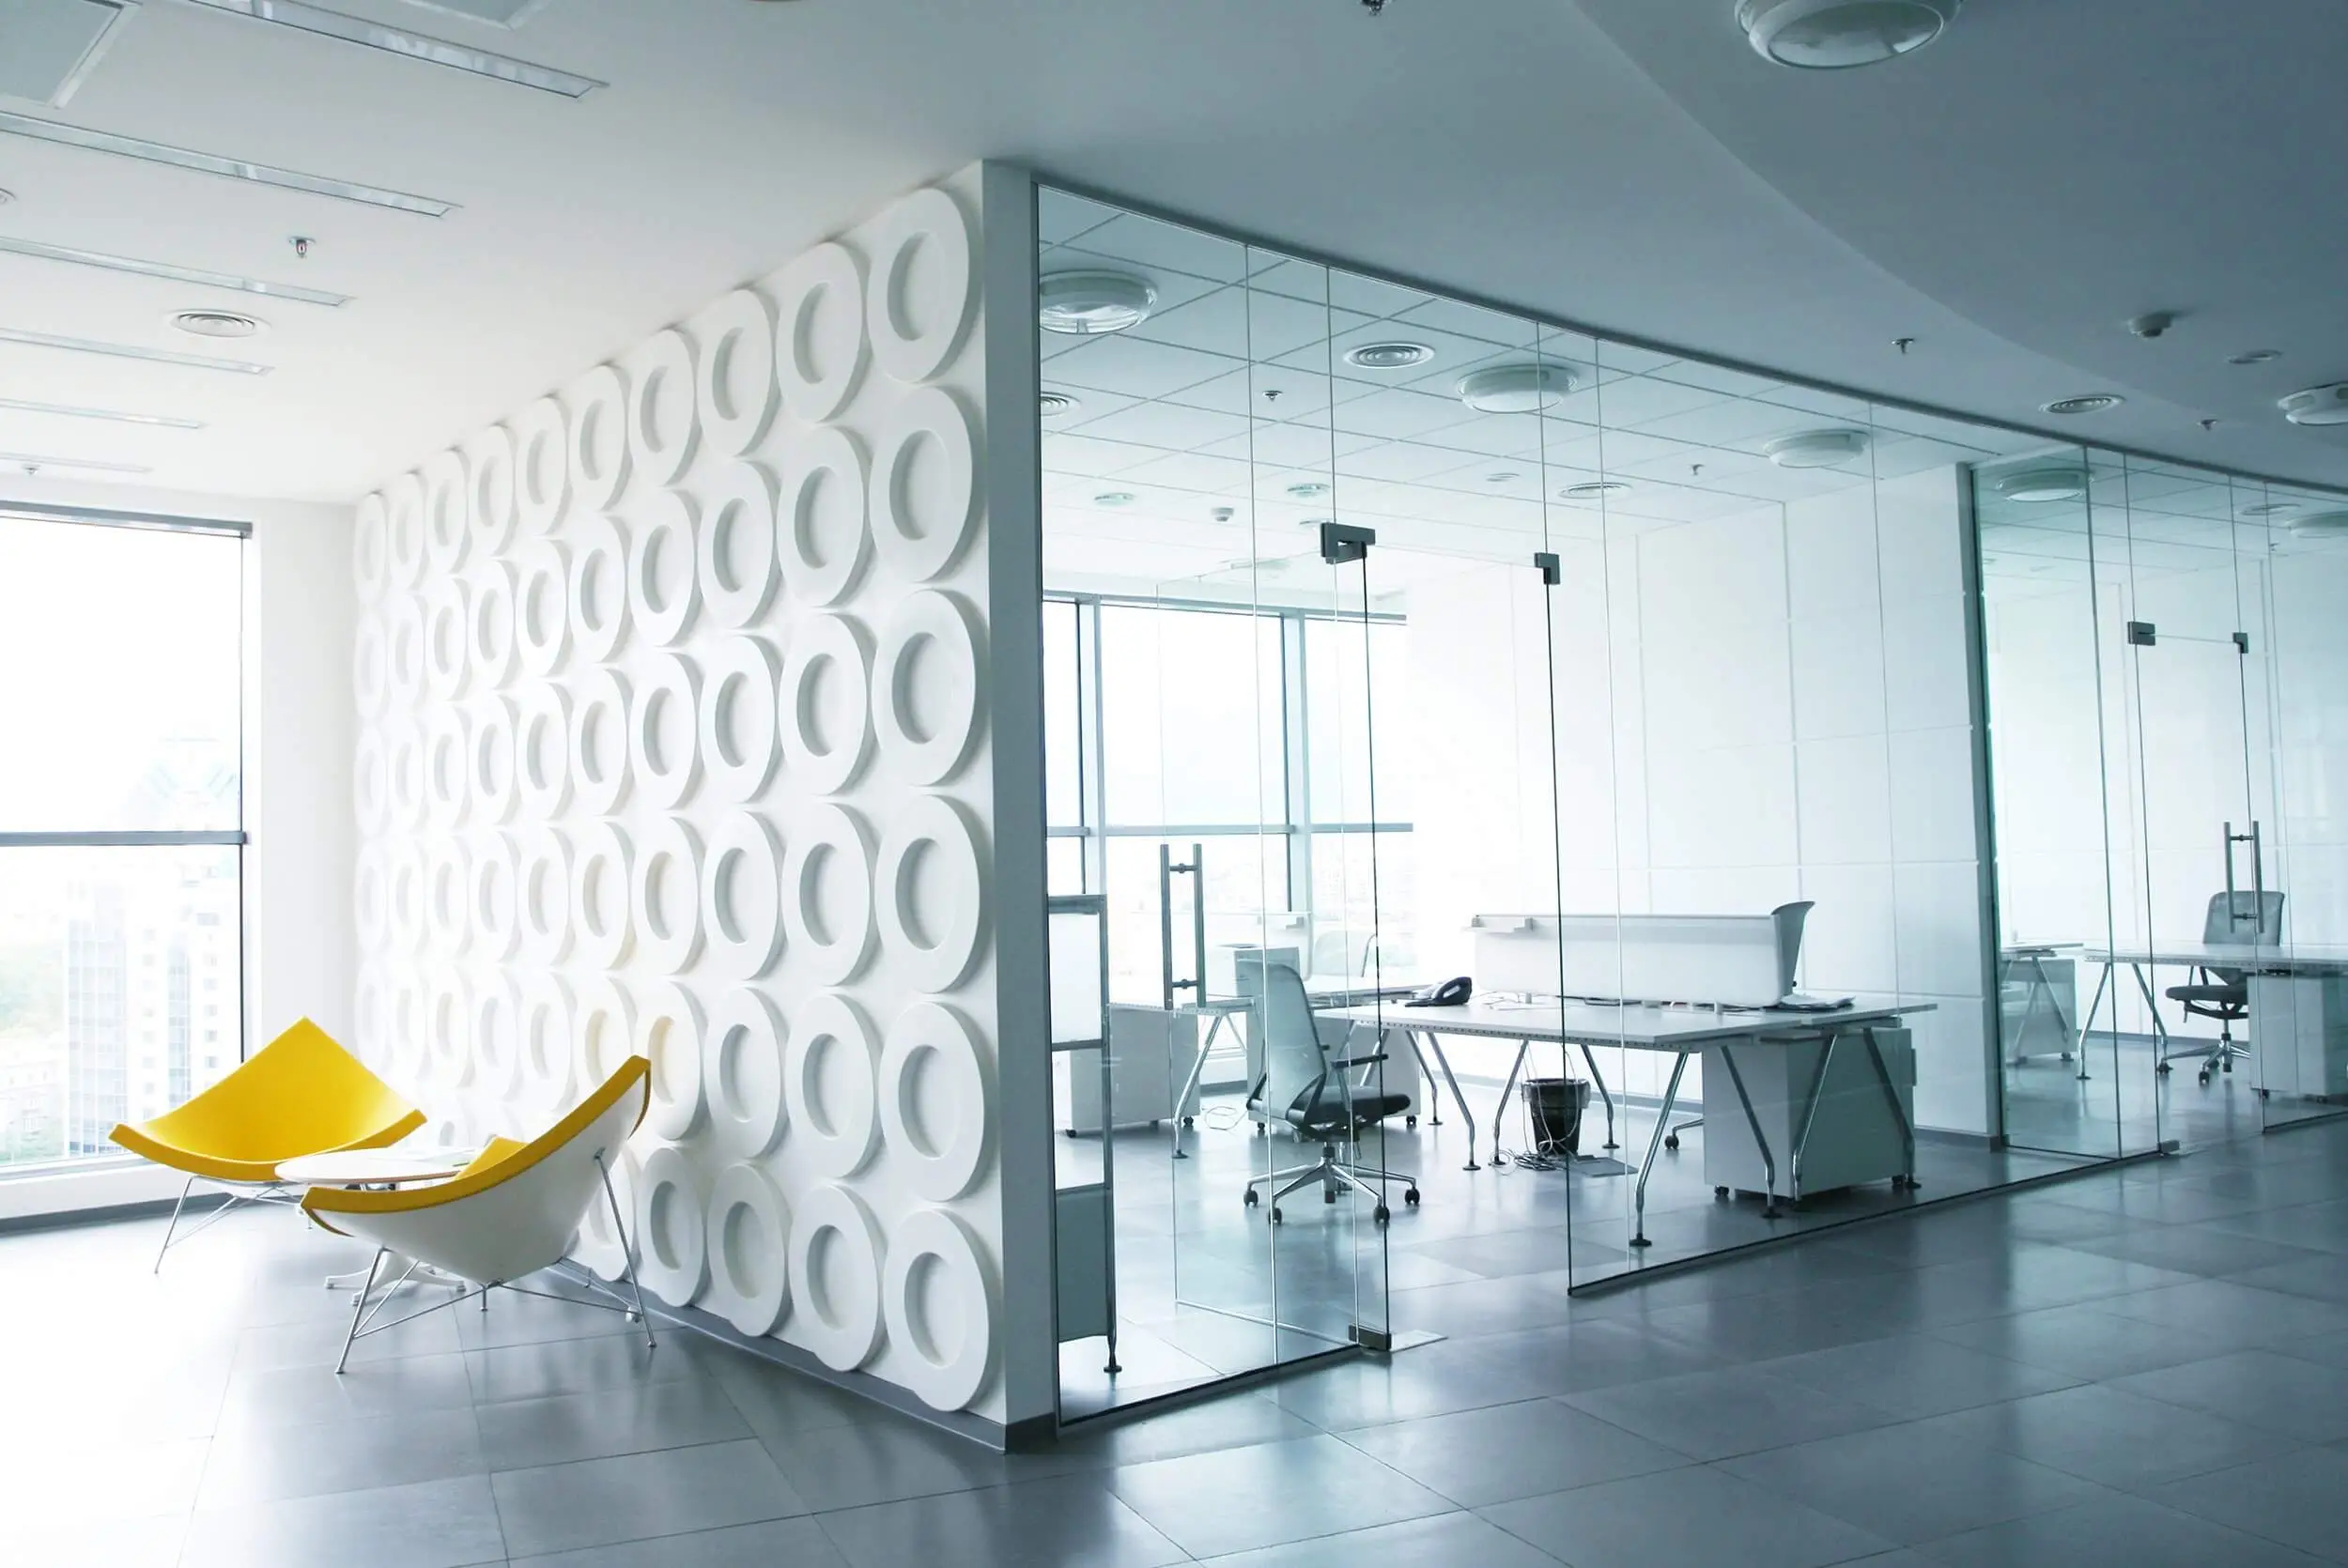 Large office spaces divided with faceted glass walls